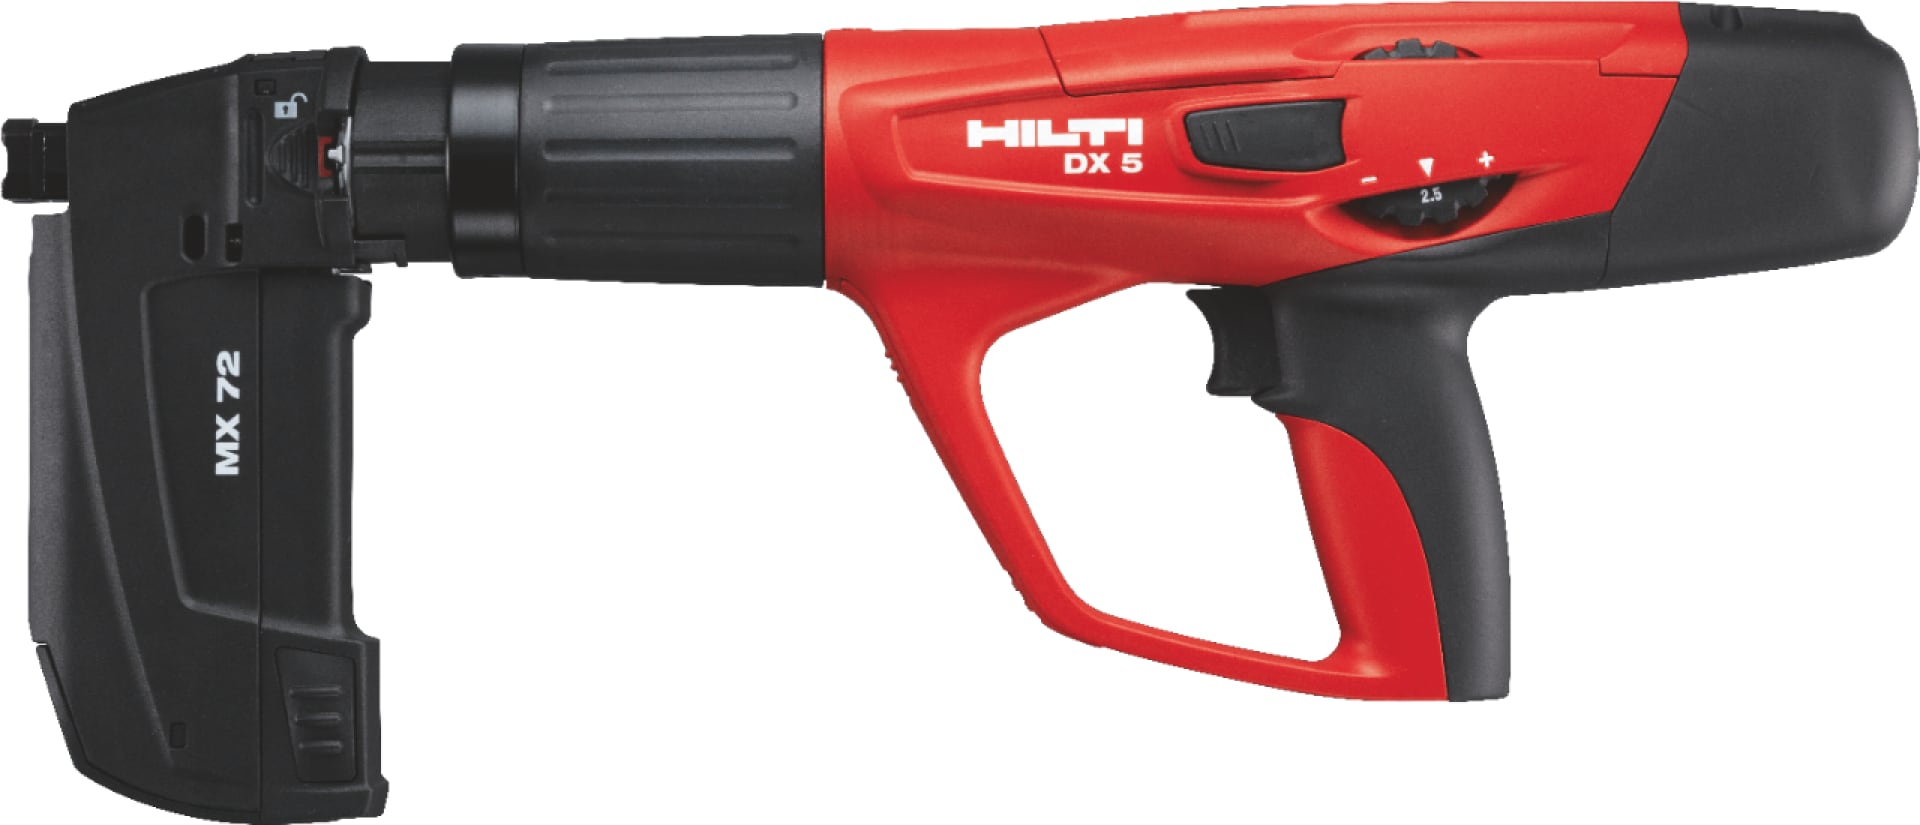 DX 5-MX POWDER-ACTUATED TOOL